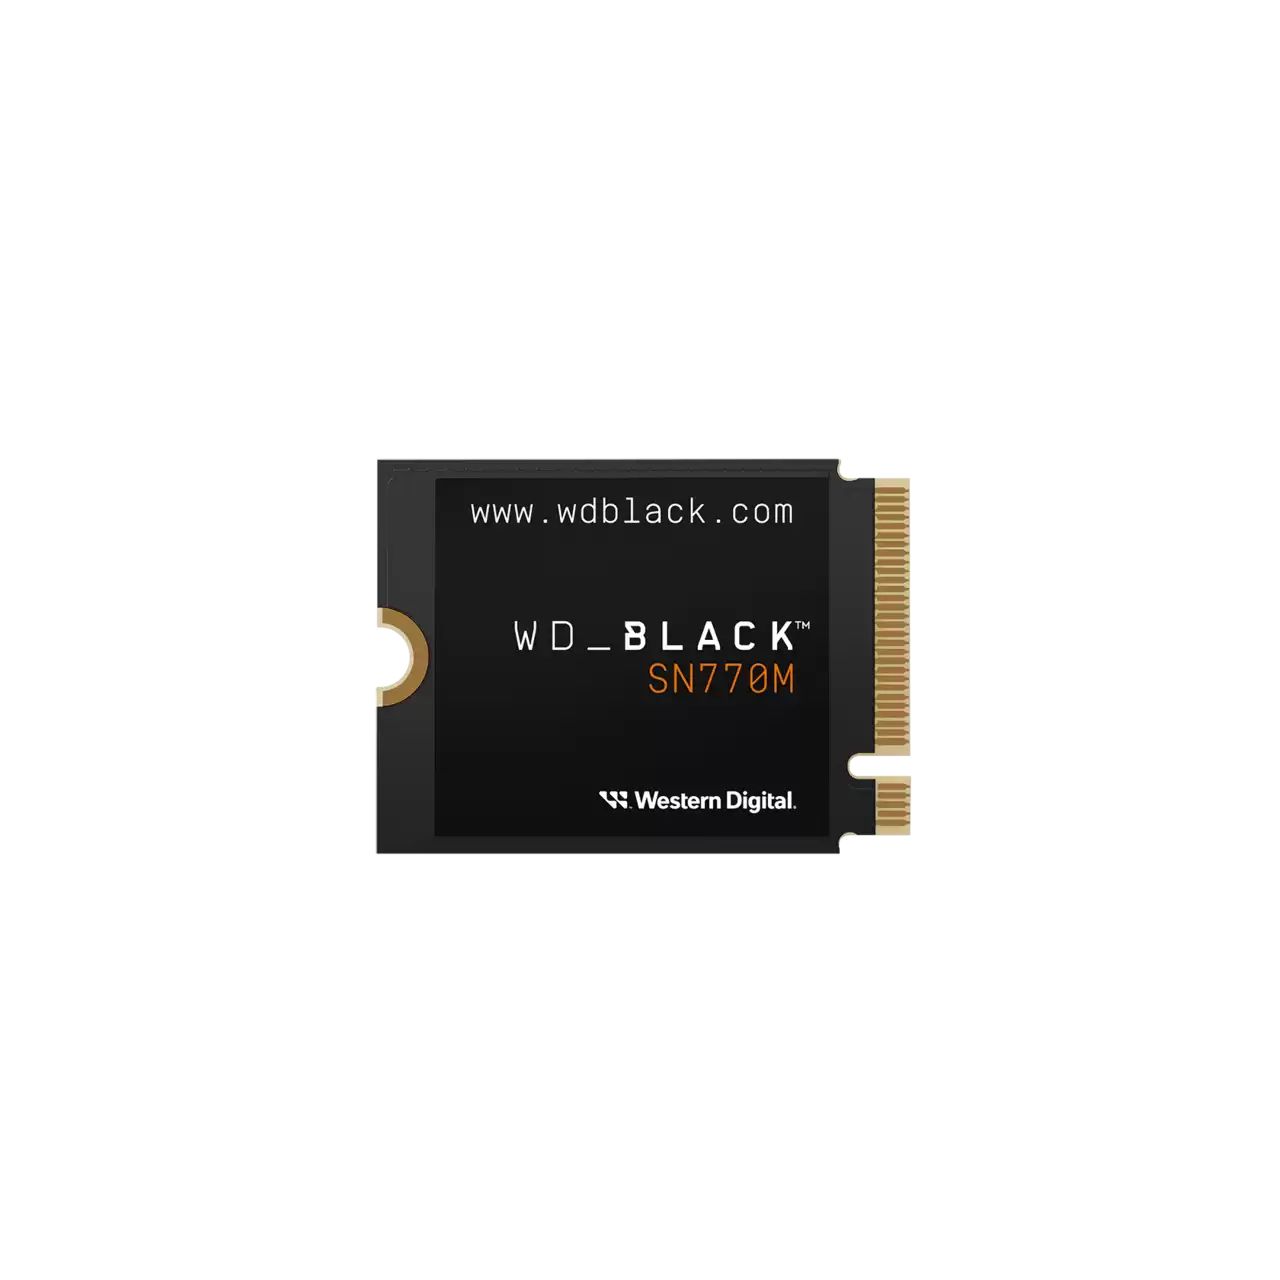 WDS200T3X0G - SSD WD Black SN770M 2Tb M.2 NVMe PCIe 4.0 TLC 3D NAND Datos 16 Gbit/s Lectura 5150 Mb/s Escritura 4850 Mb/s (WDS200T3X0G)